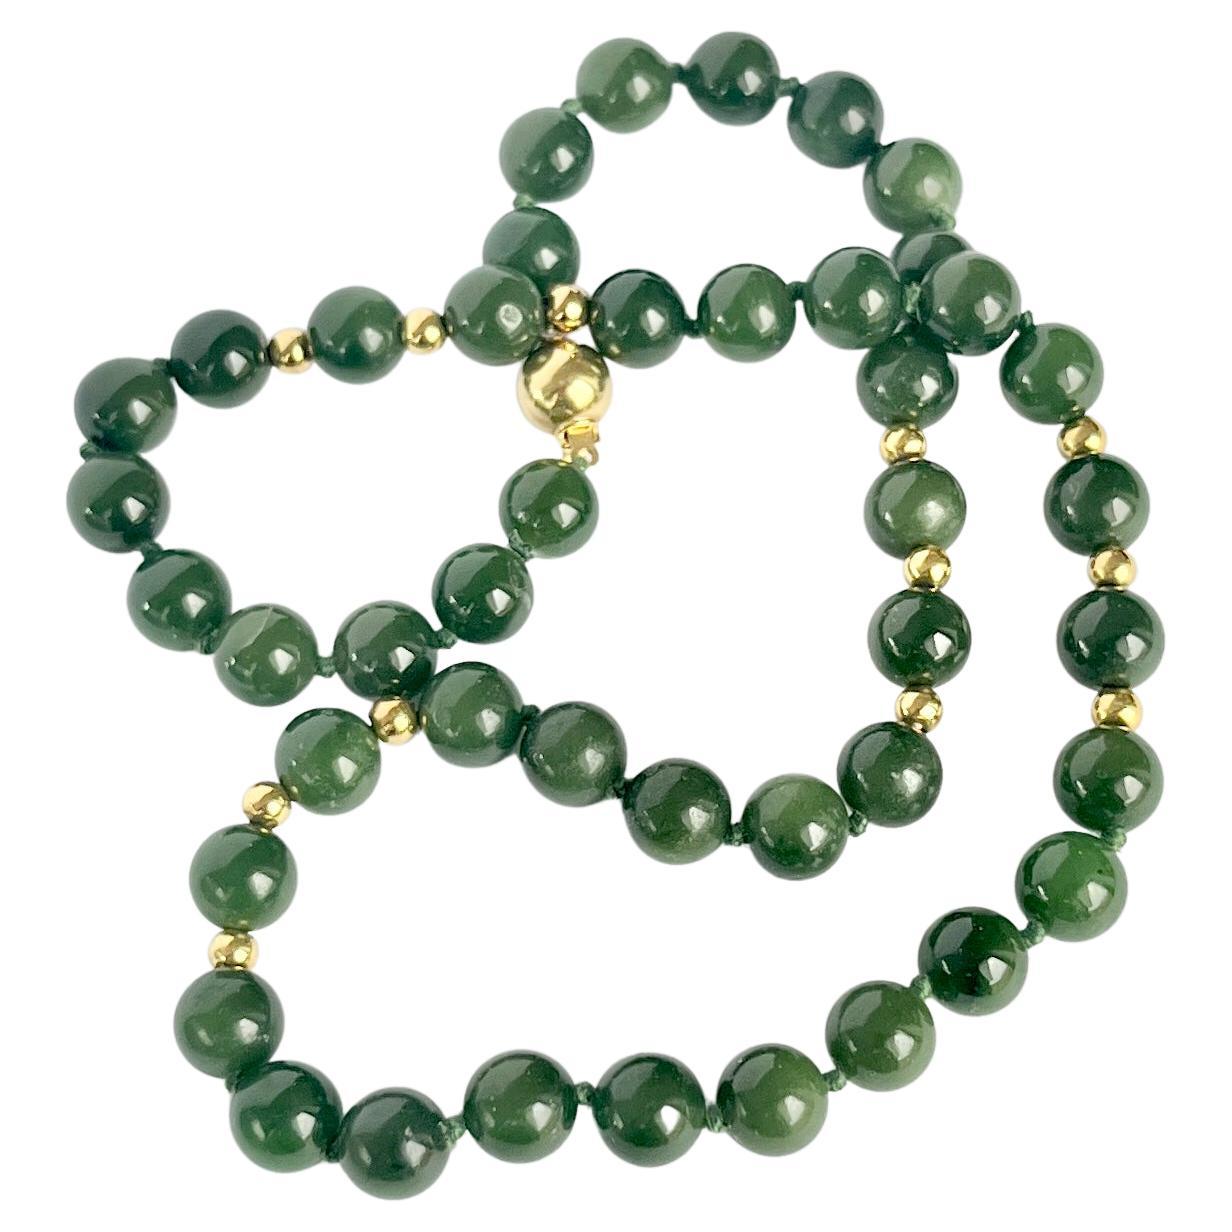 Vintage Nephrite Jade and 18 Carat Gold Bead Necklace